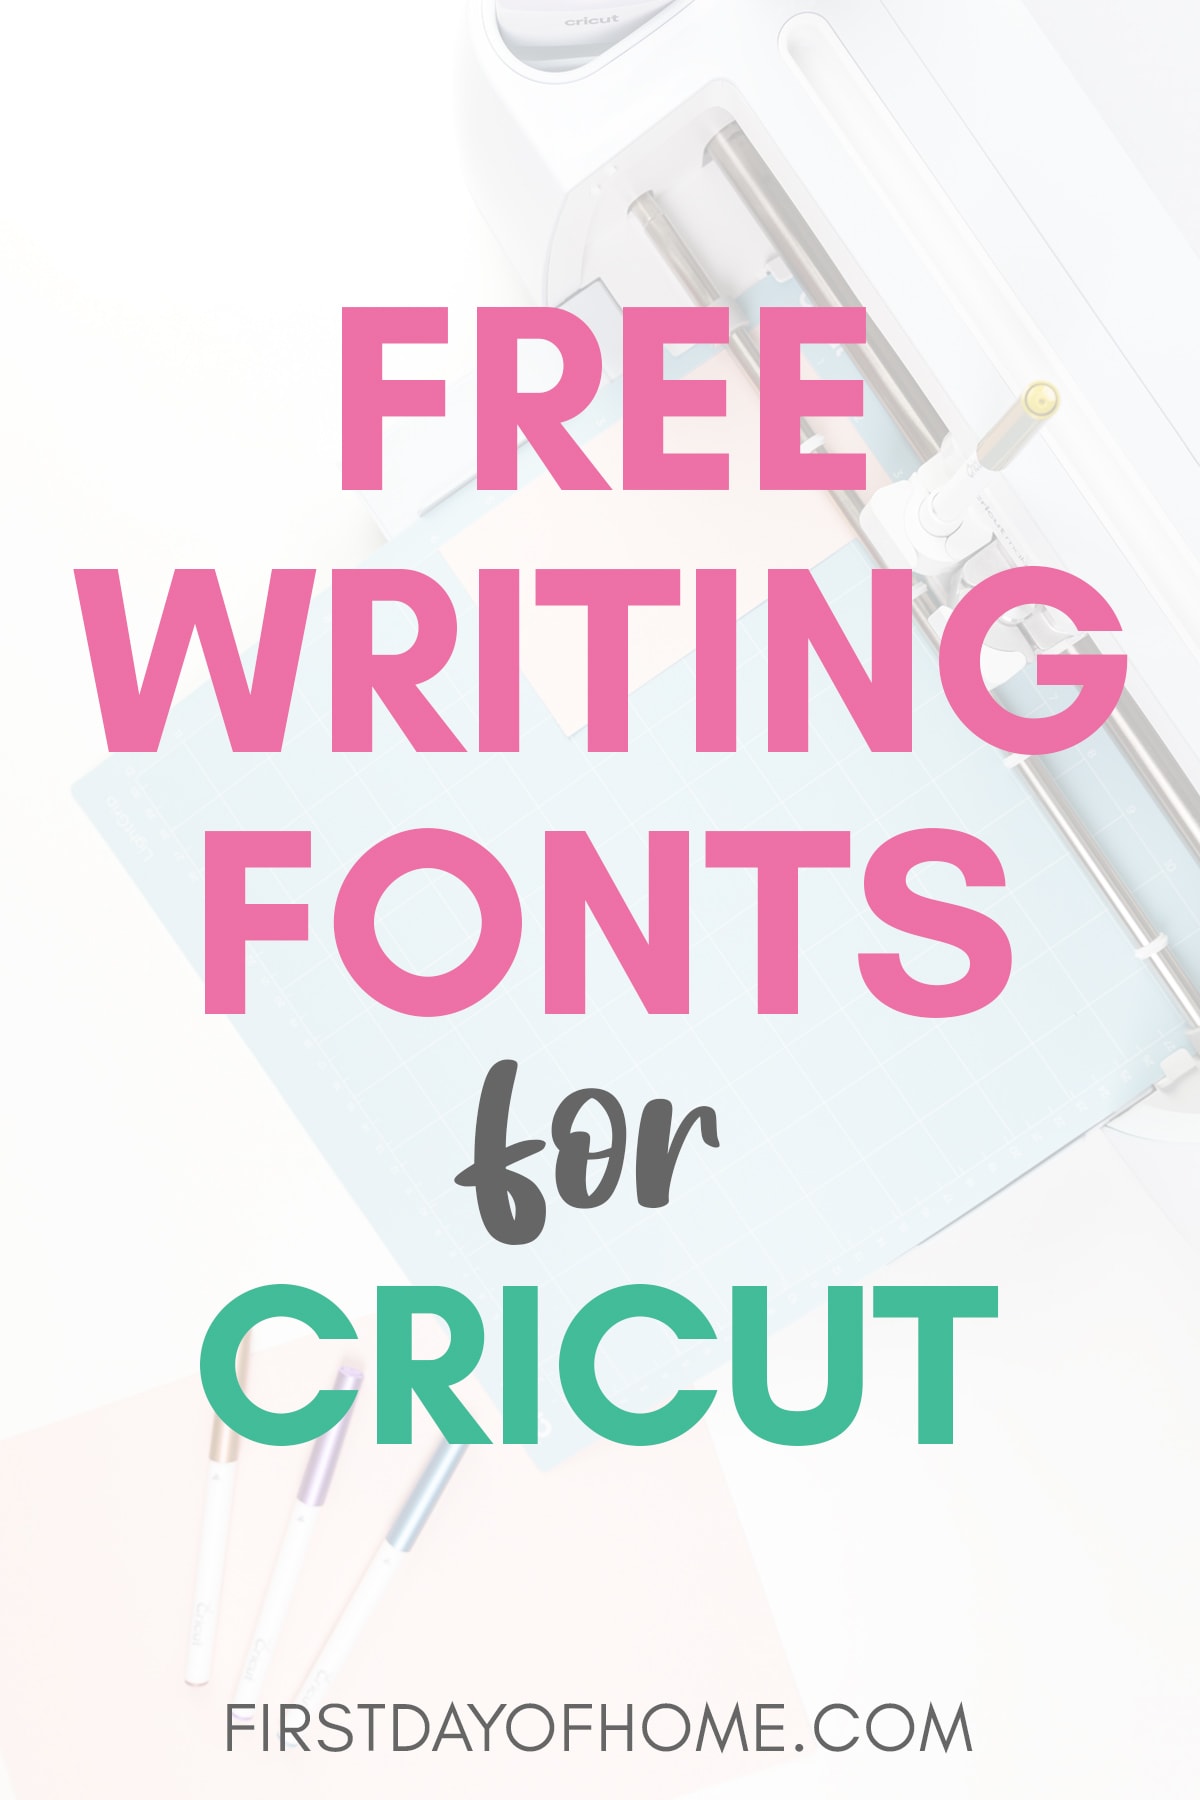 Image with text overlay reading "Free Writing Fonts for Cricut"